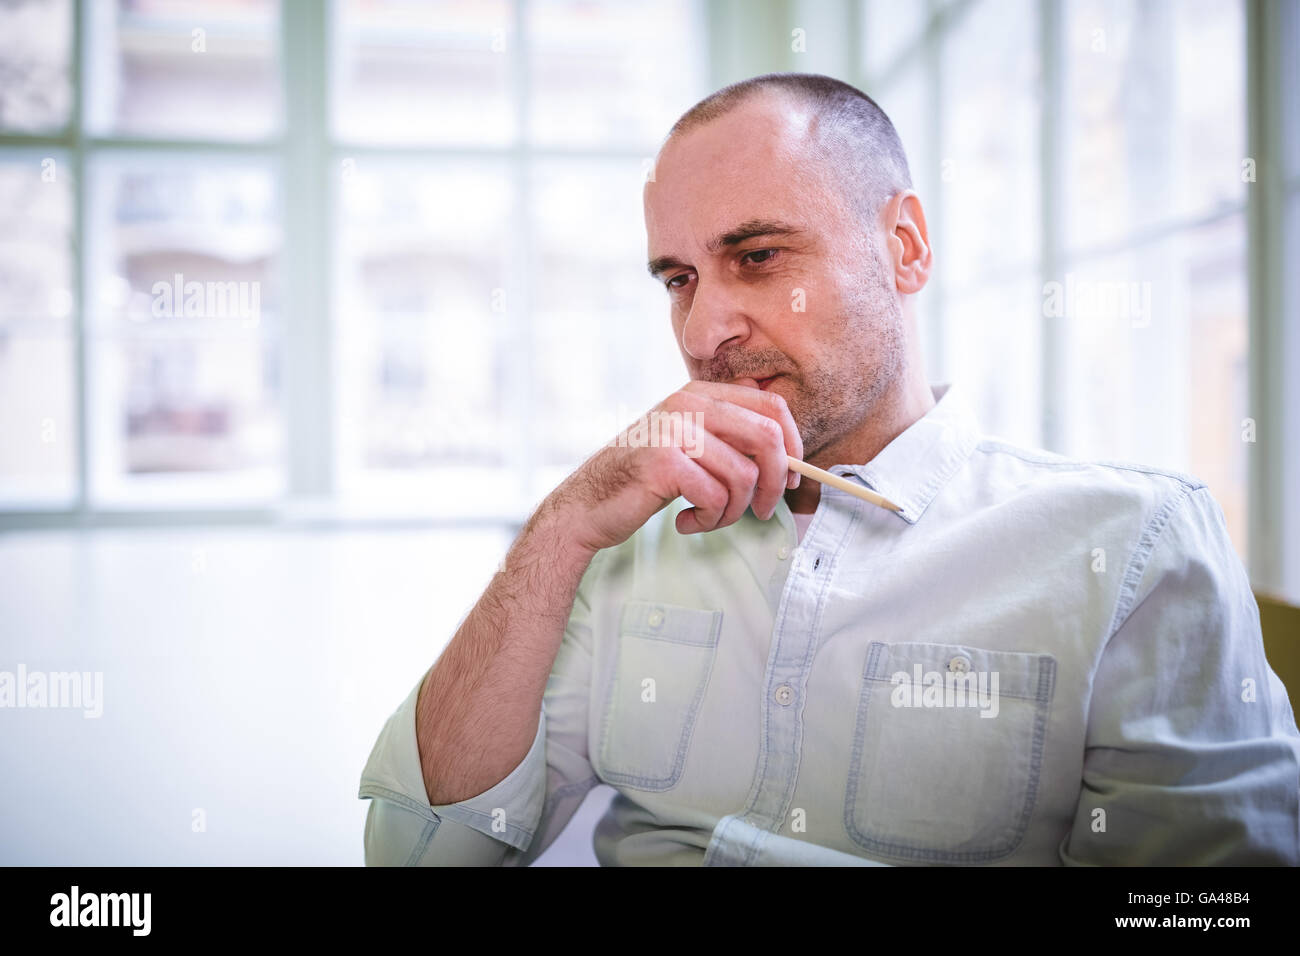 Thoughtful businessman with hand on chin Stock Photo